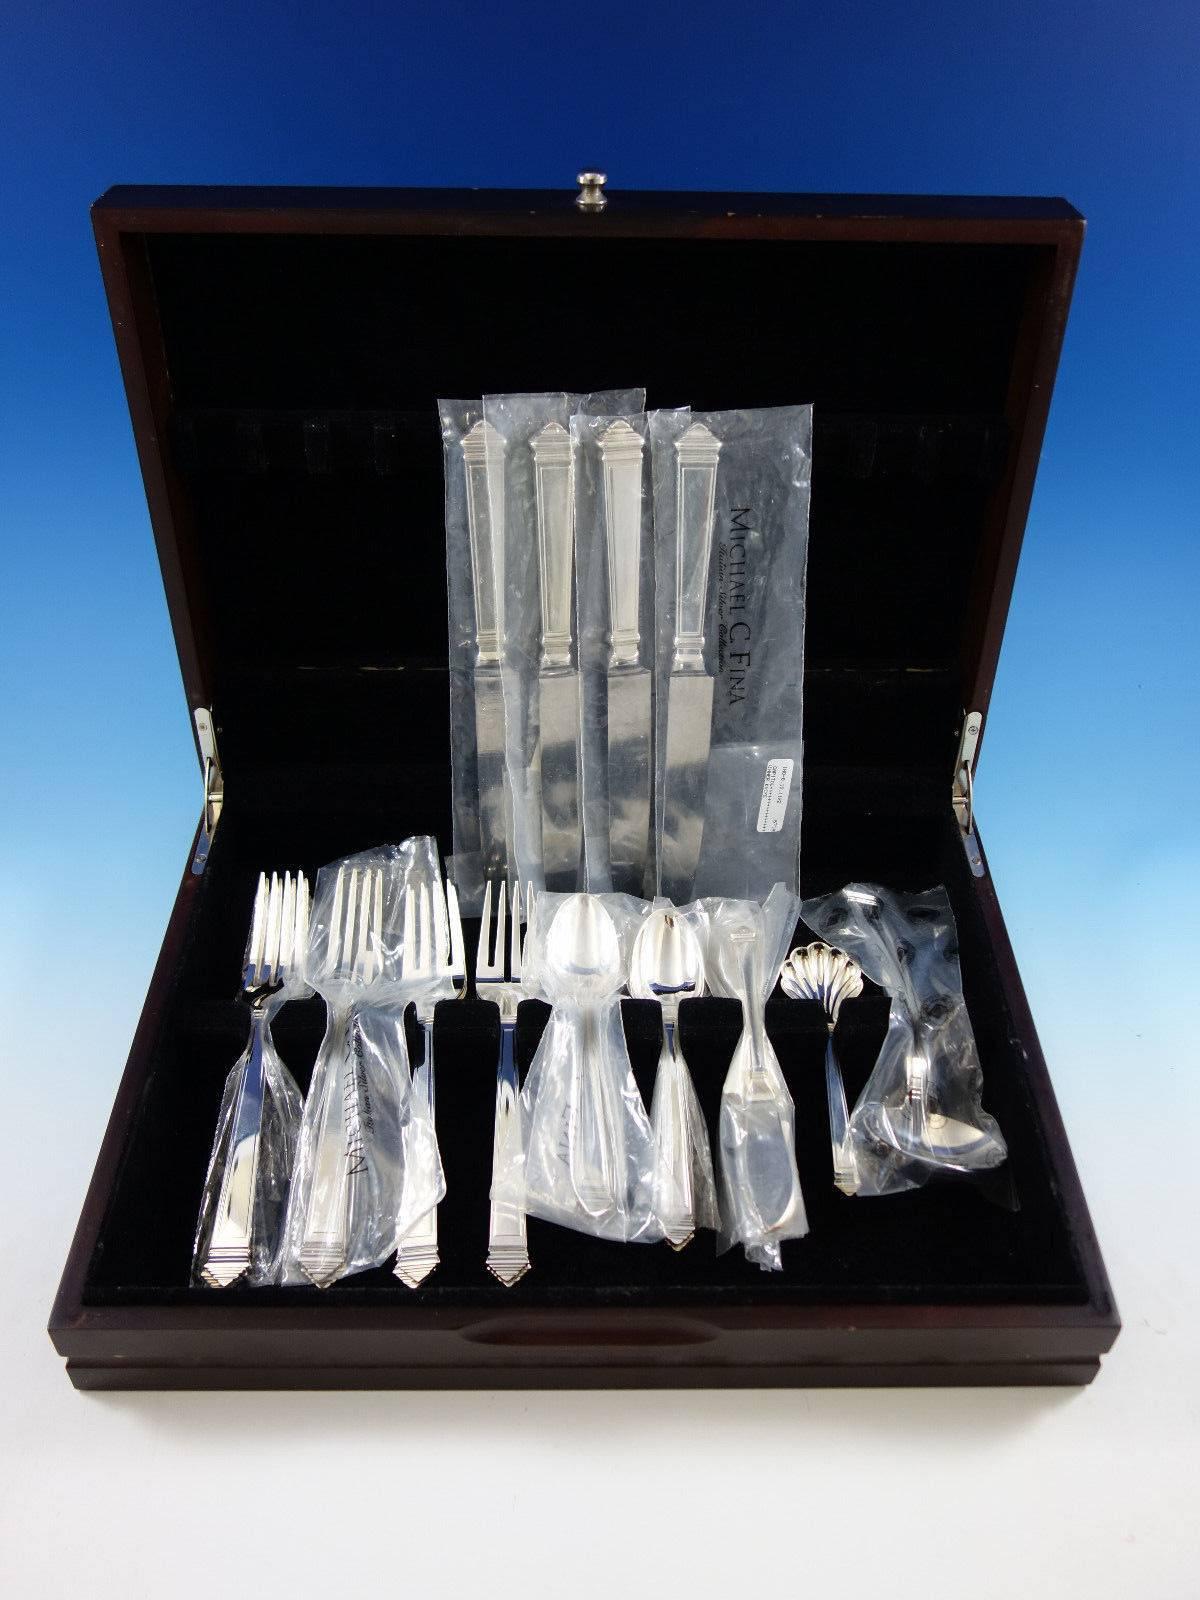 This set includes: 

4 Dinner Size Knives, 9 1/2